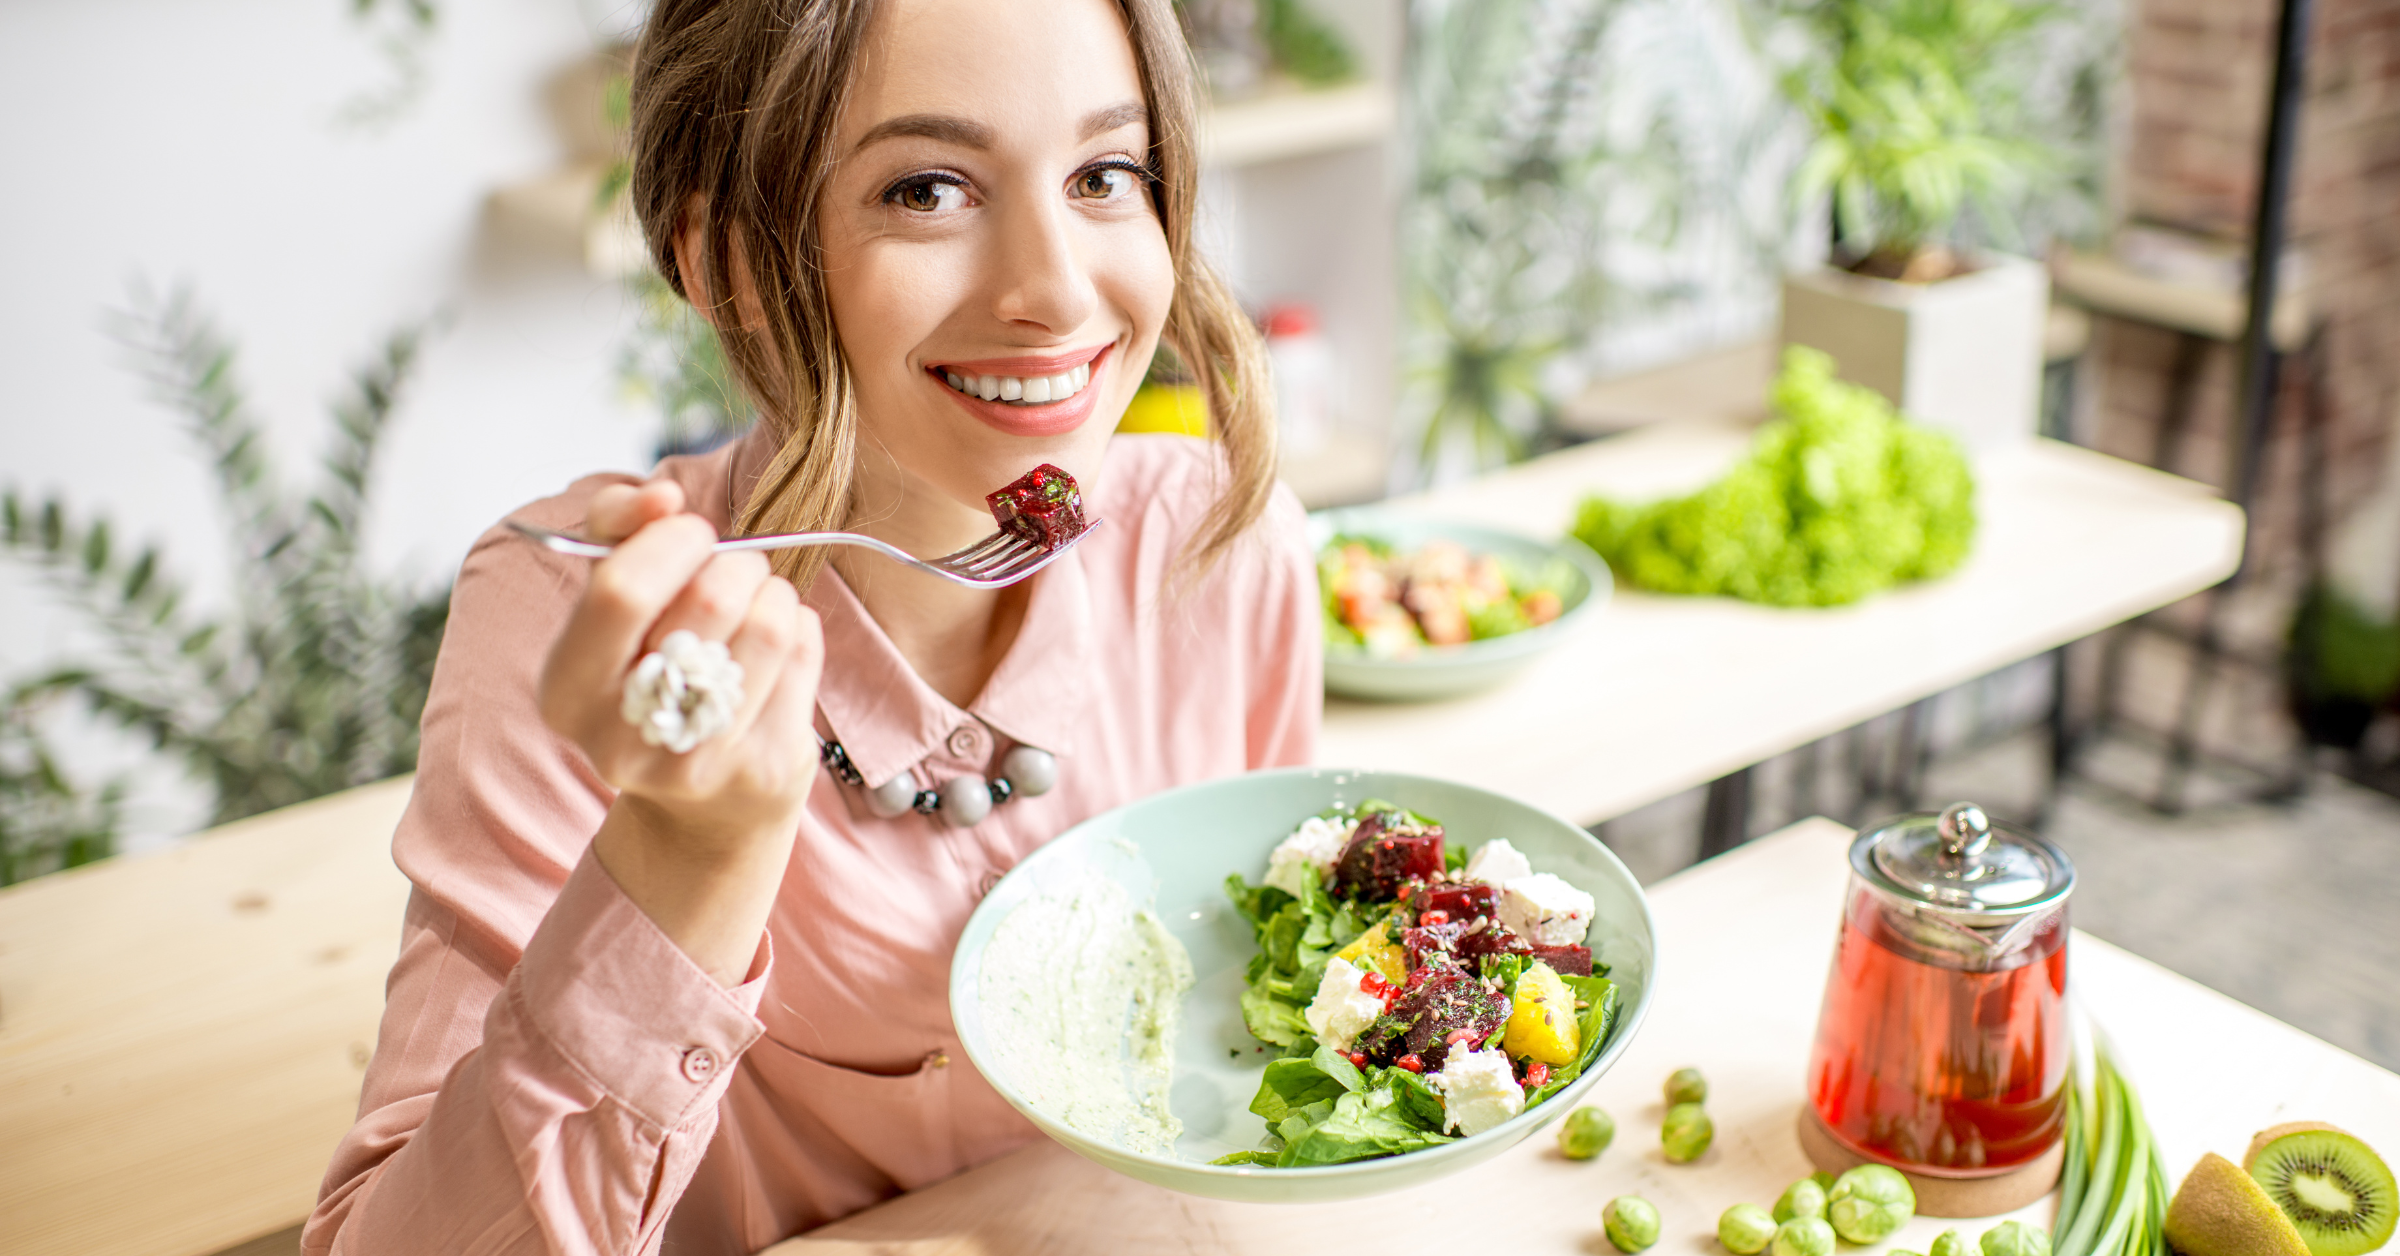 Discover 8 practical tips for maintaining a healthy diet on a budget, making nutritious choices accessible and affordable for a balanced and wallet-friendly lifestyle.